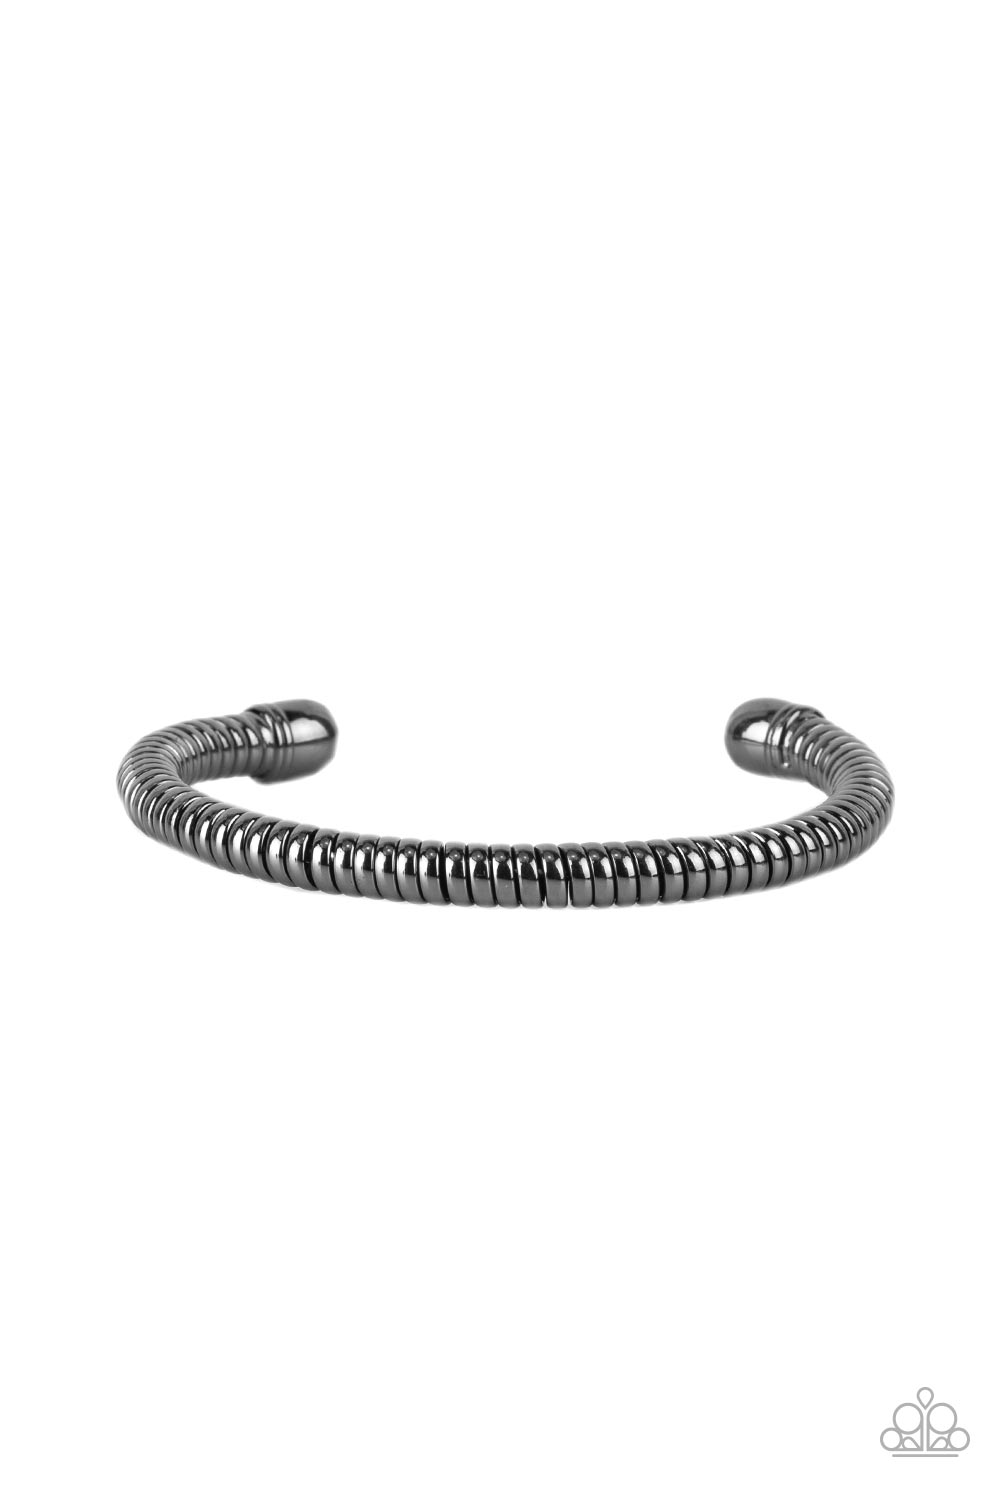 Paparazzi Accessories Turbocharged - Black A glistening gunmetal cable has been wrapped tightly around a gunmetal cuff, creating edgy shimmer around the wrist. Sold as one individual bracelet. Jewelry